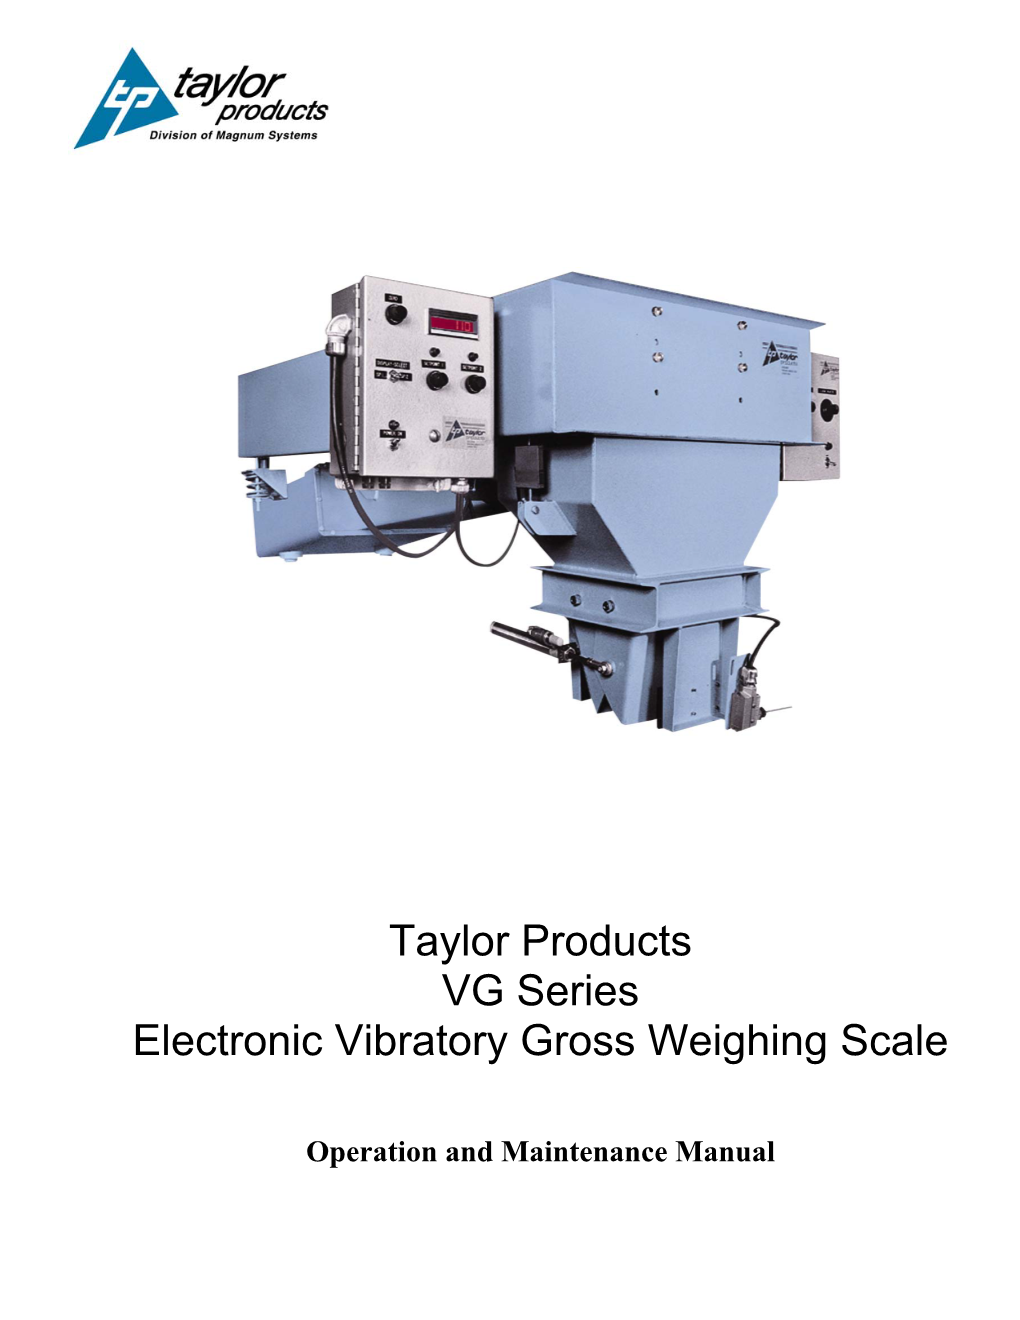 Taylor Products VG Series Electronic Vibratory Gross Weighing Scale